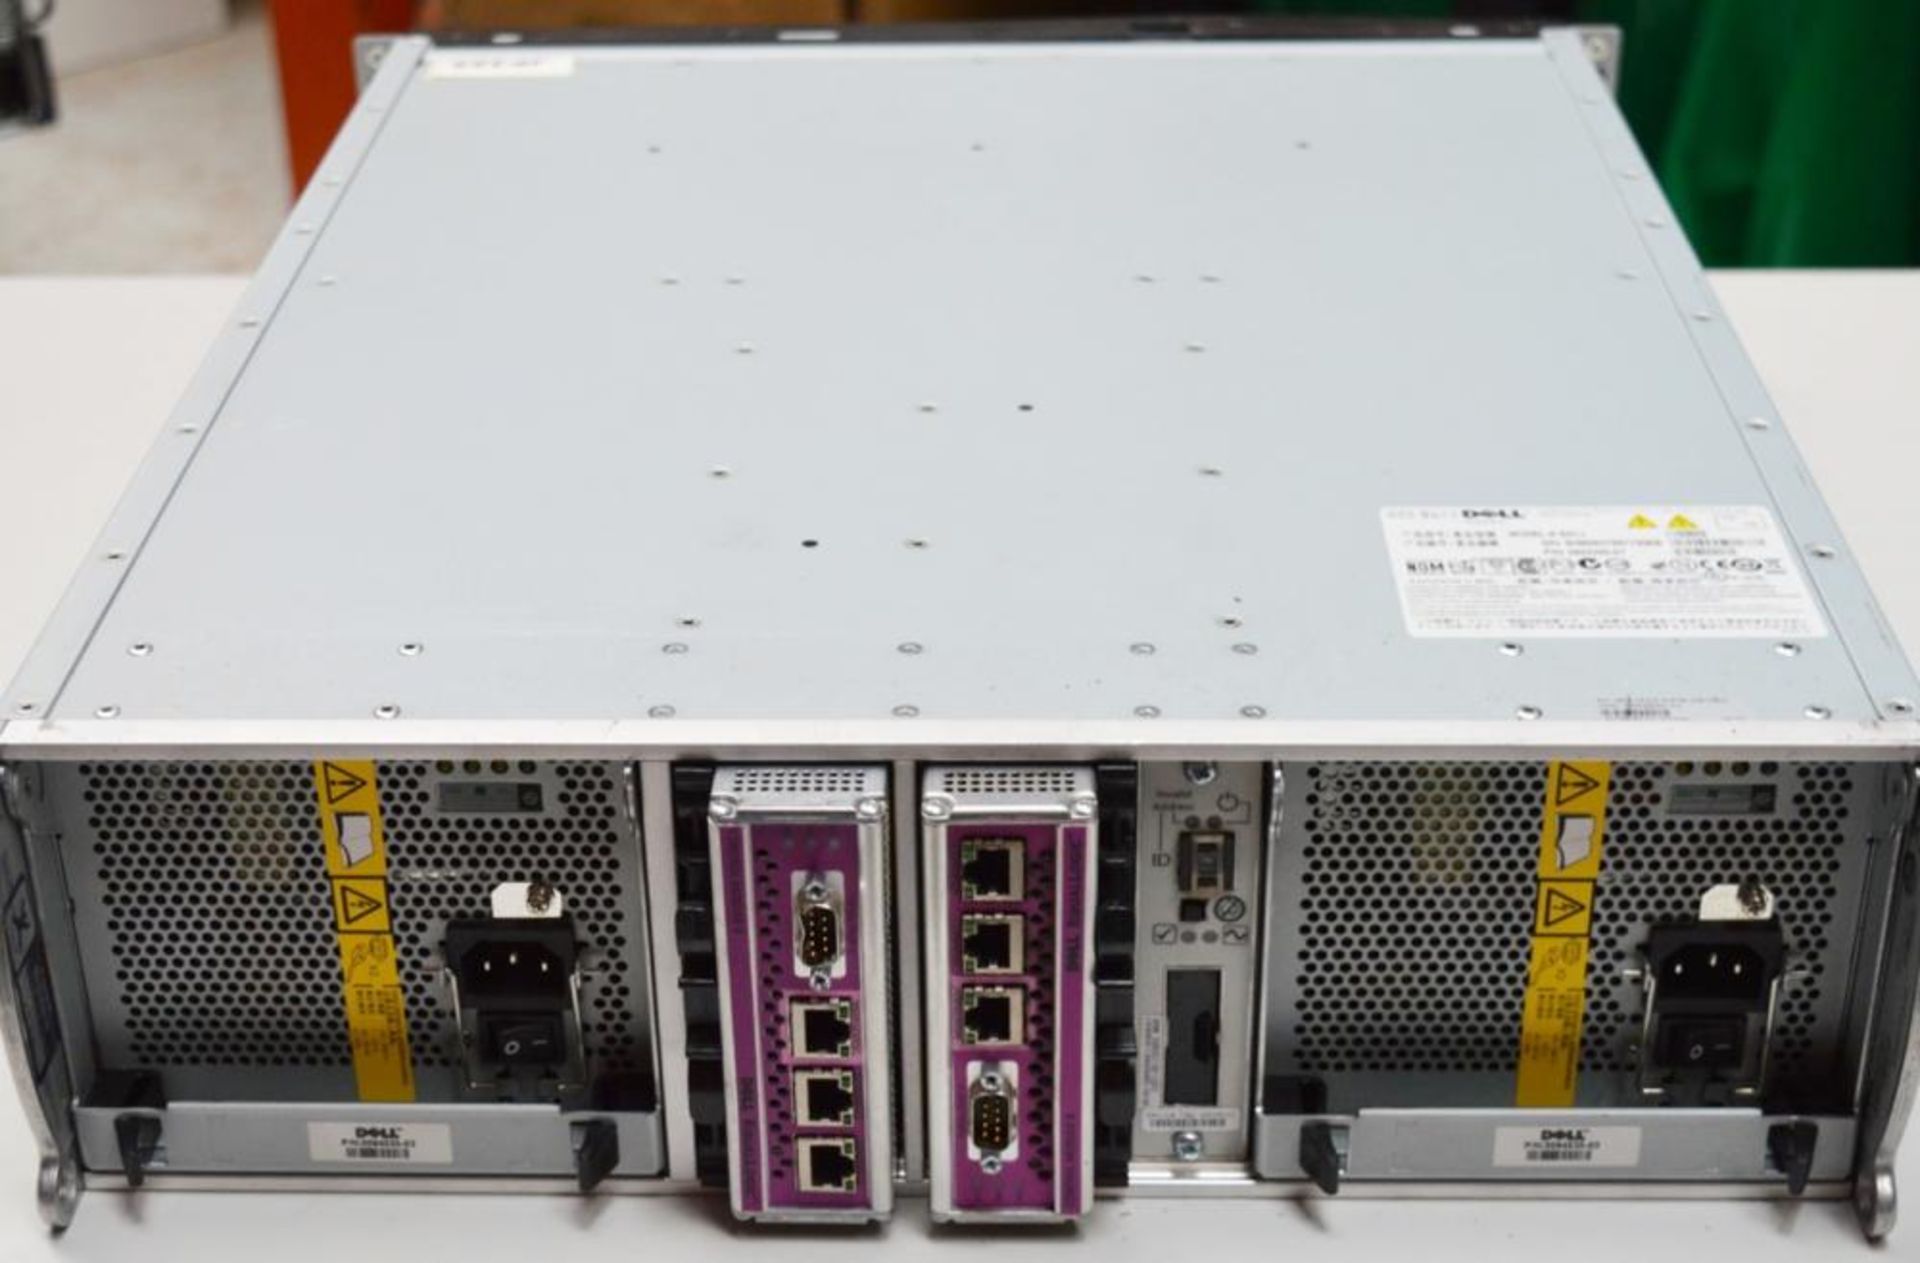 1 x Dell EqualLogic PS4000 Seires iSCSI Storage Array With Dual PSU's and 2 x EqualLogic 8 Modules - Image 4 of 7